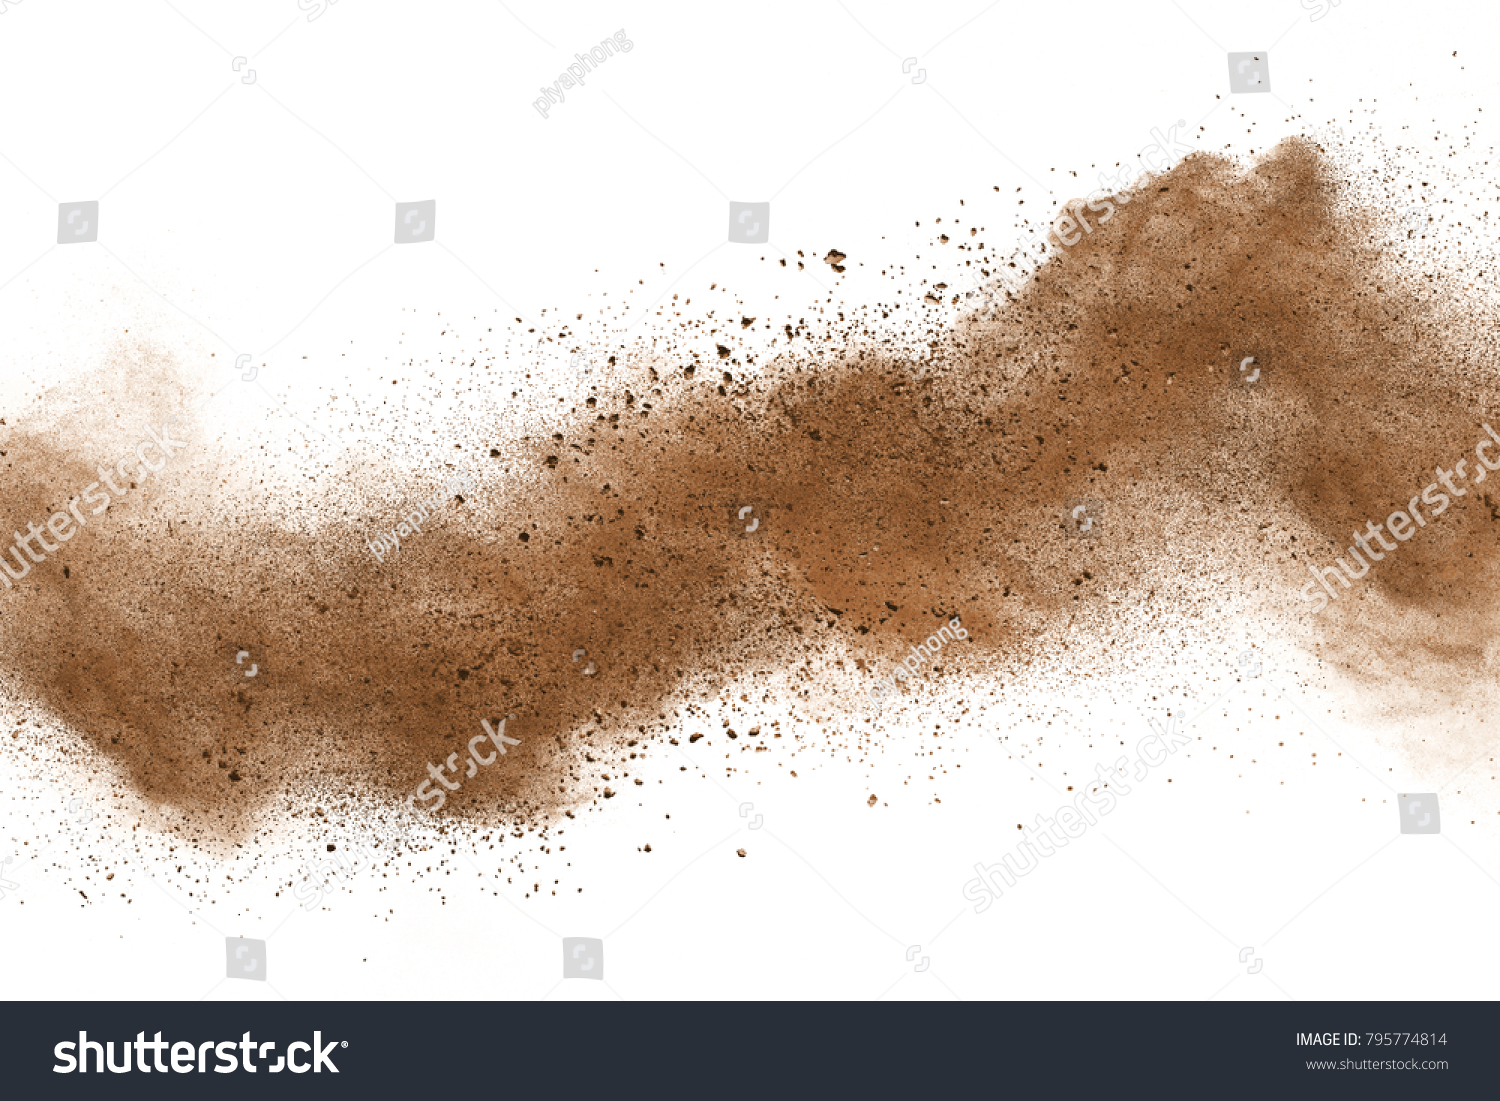 abstract colorful powder splatted background on white background.
 #795774814